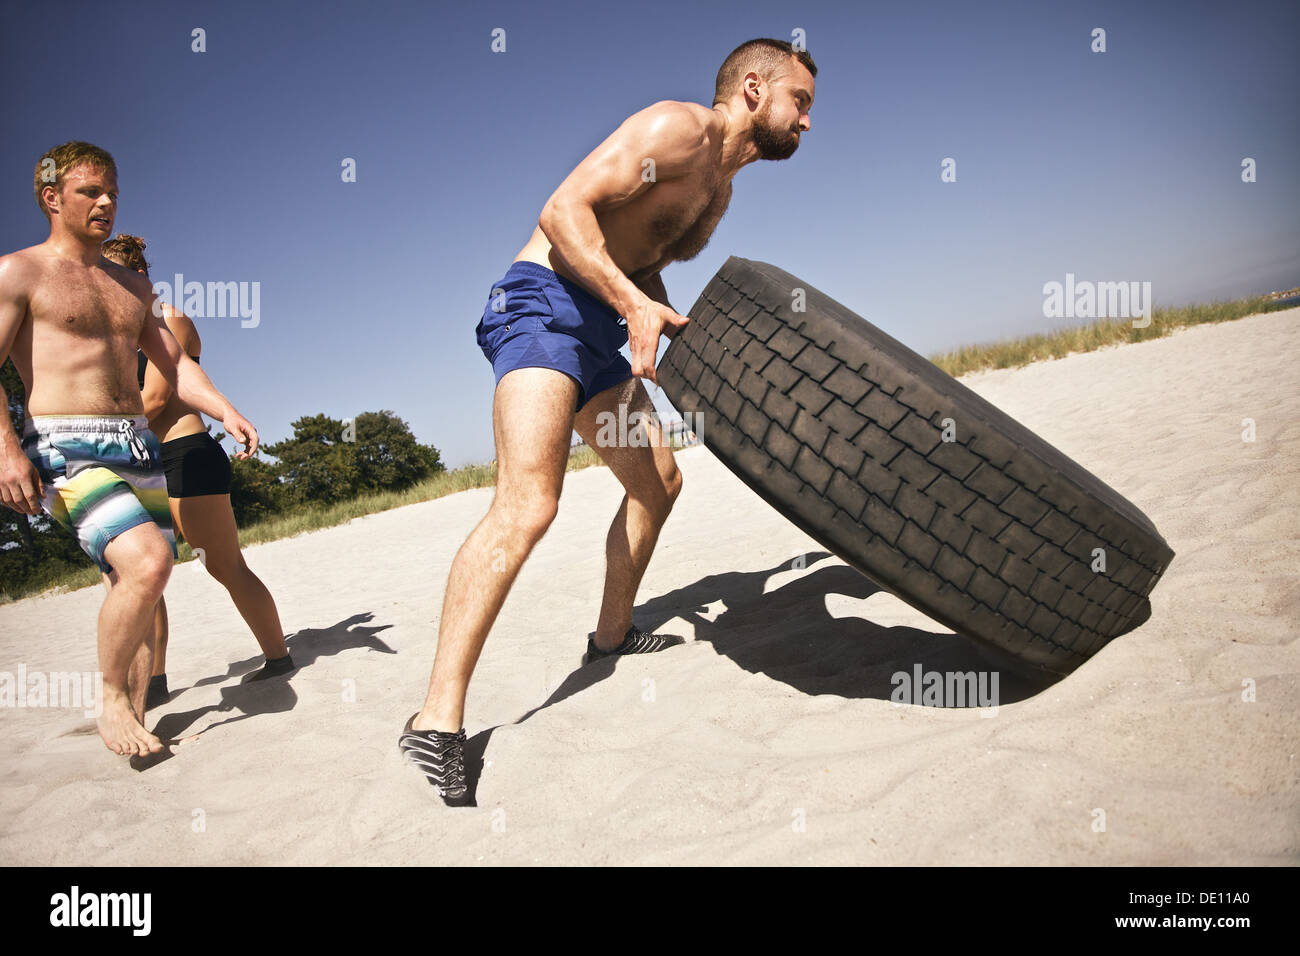 Tough male athlete flipping a truck tire. Young people doing crossfit exercise on beach. Stock Photo